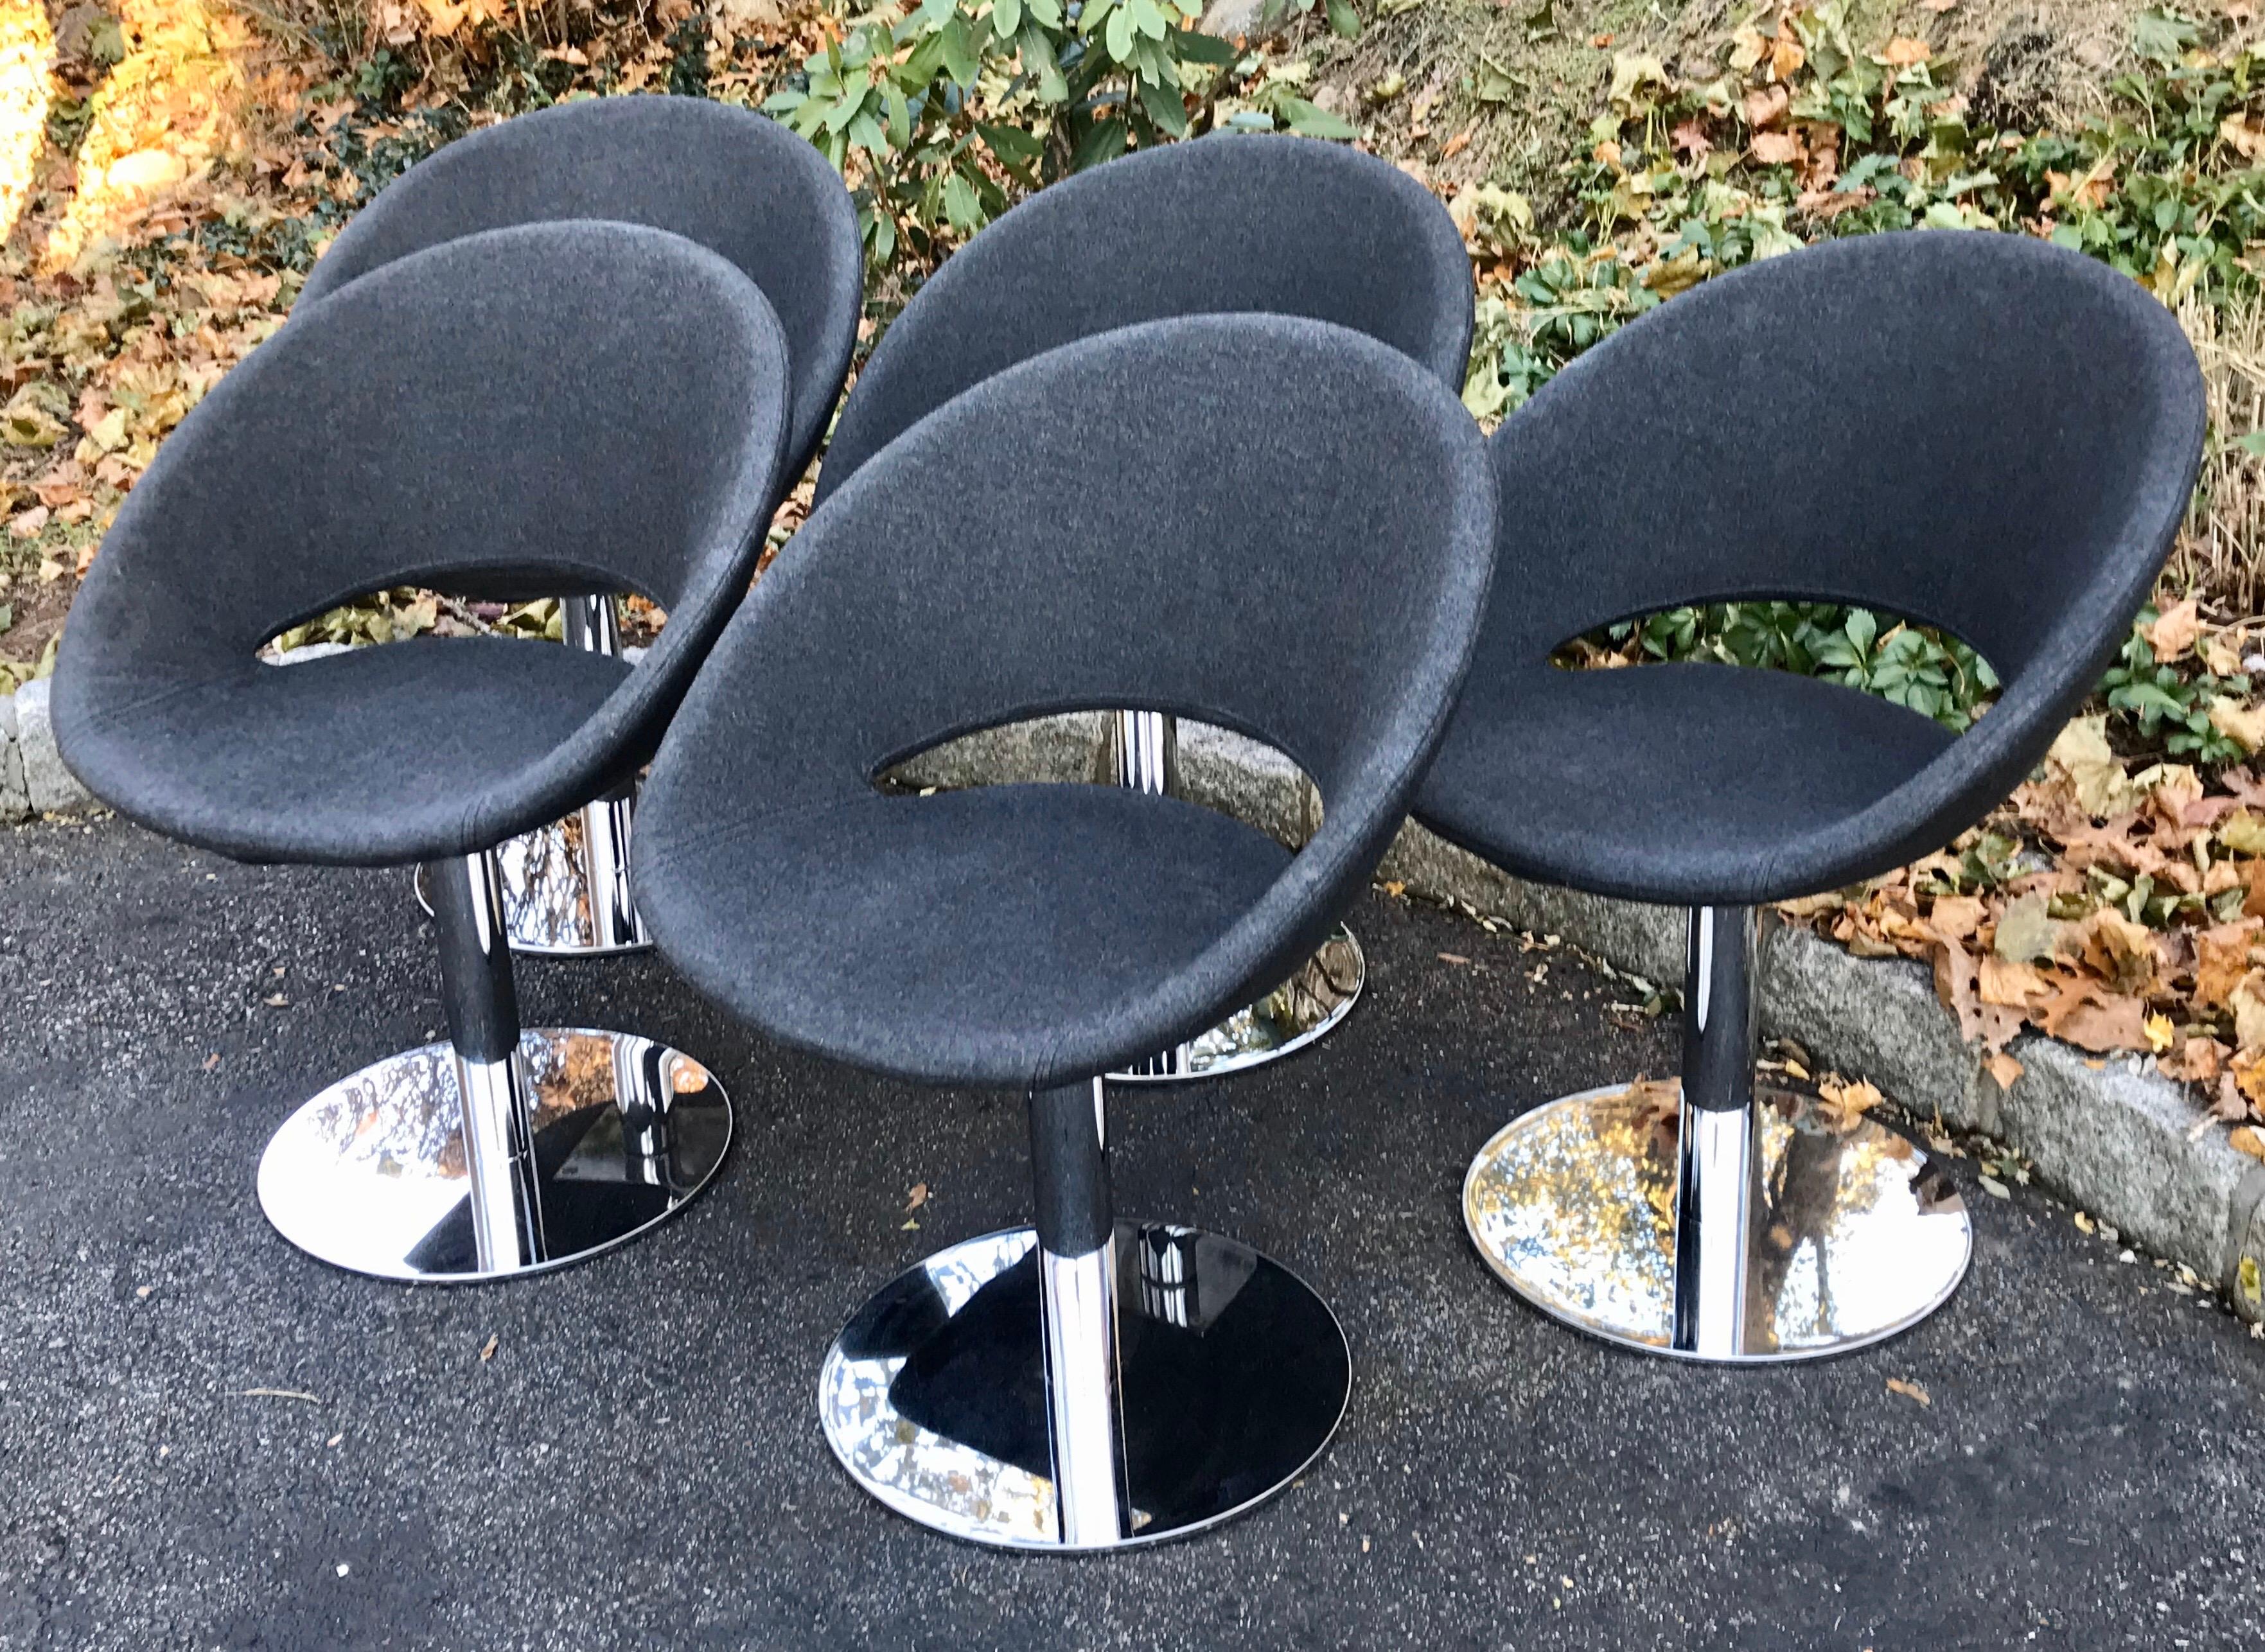 Beautiful set of 5 swivel base dining chairs, chrome base with large circular bottom, charcoal gray fabric, similar to the designs of B&B Italia. Very high end and very heave base.